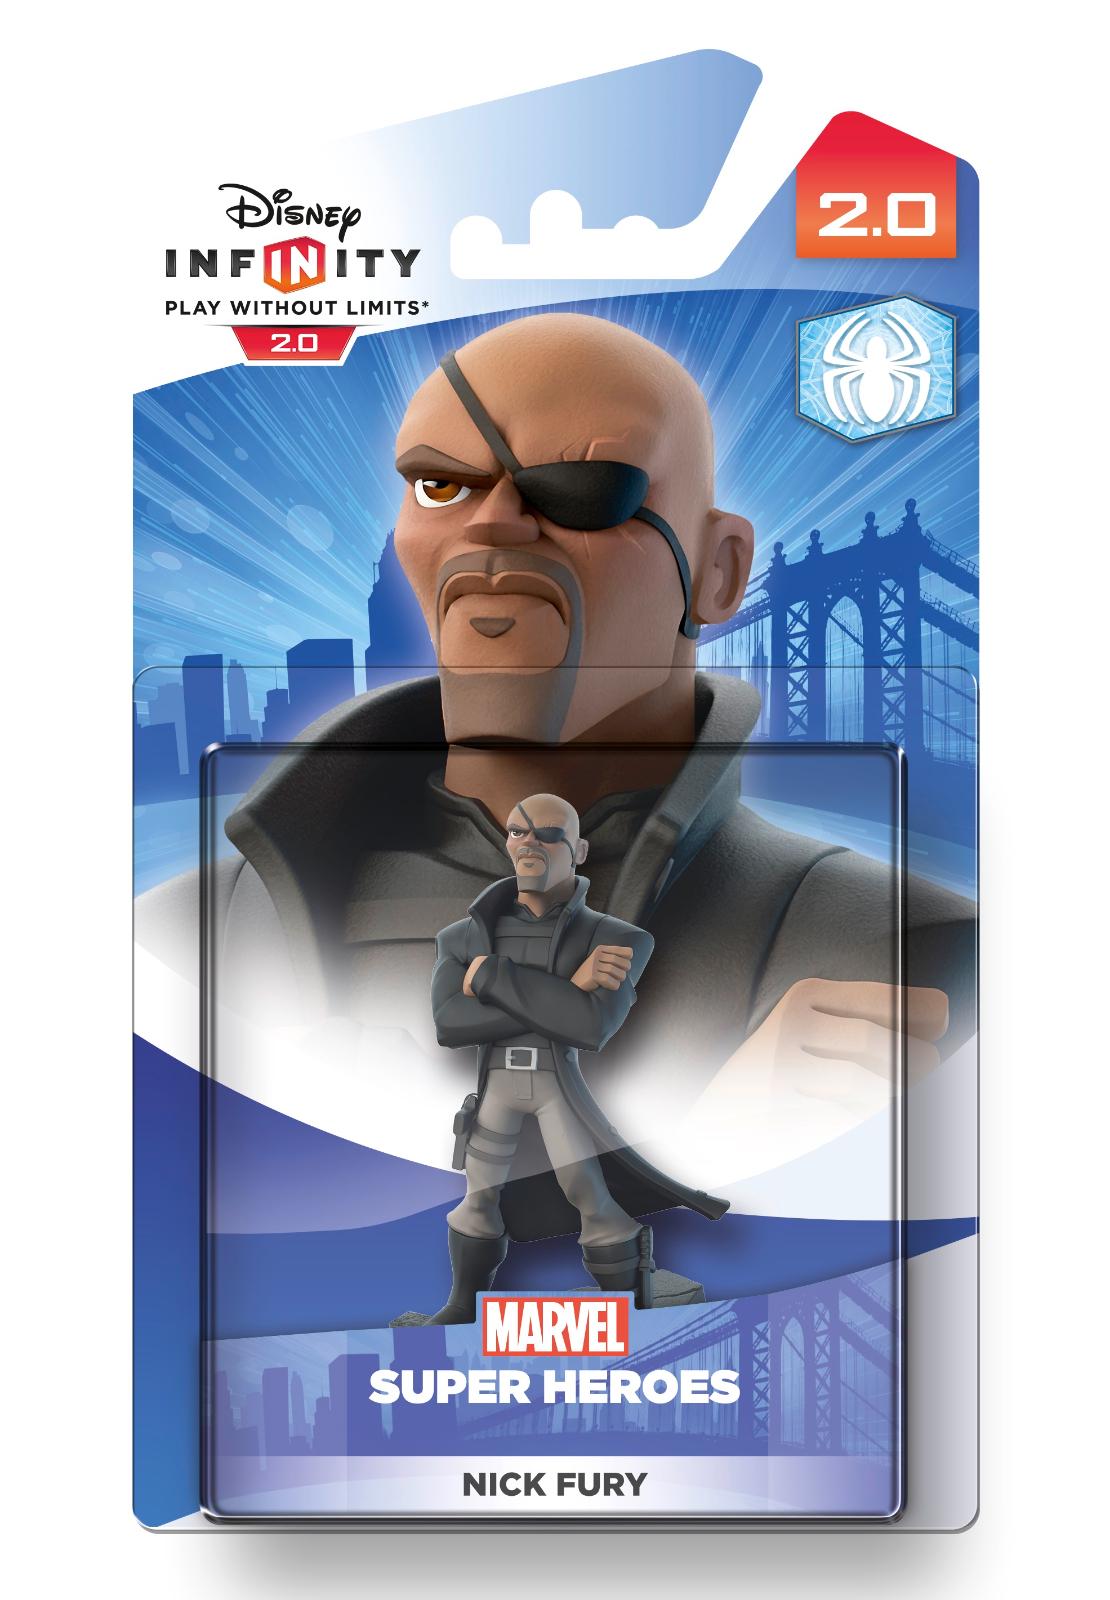 Nick Fury Prices Disney Infinity Compare Loose Cib And New Prices